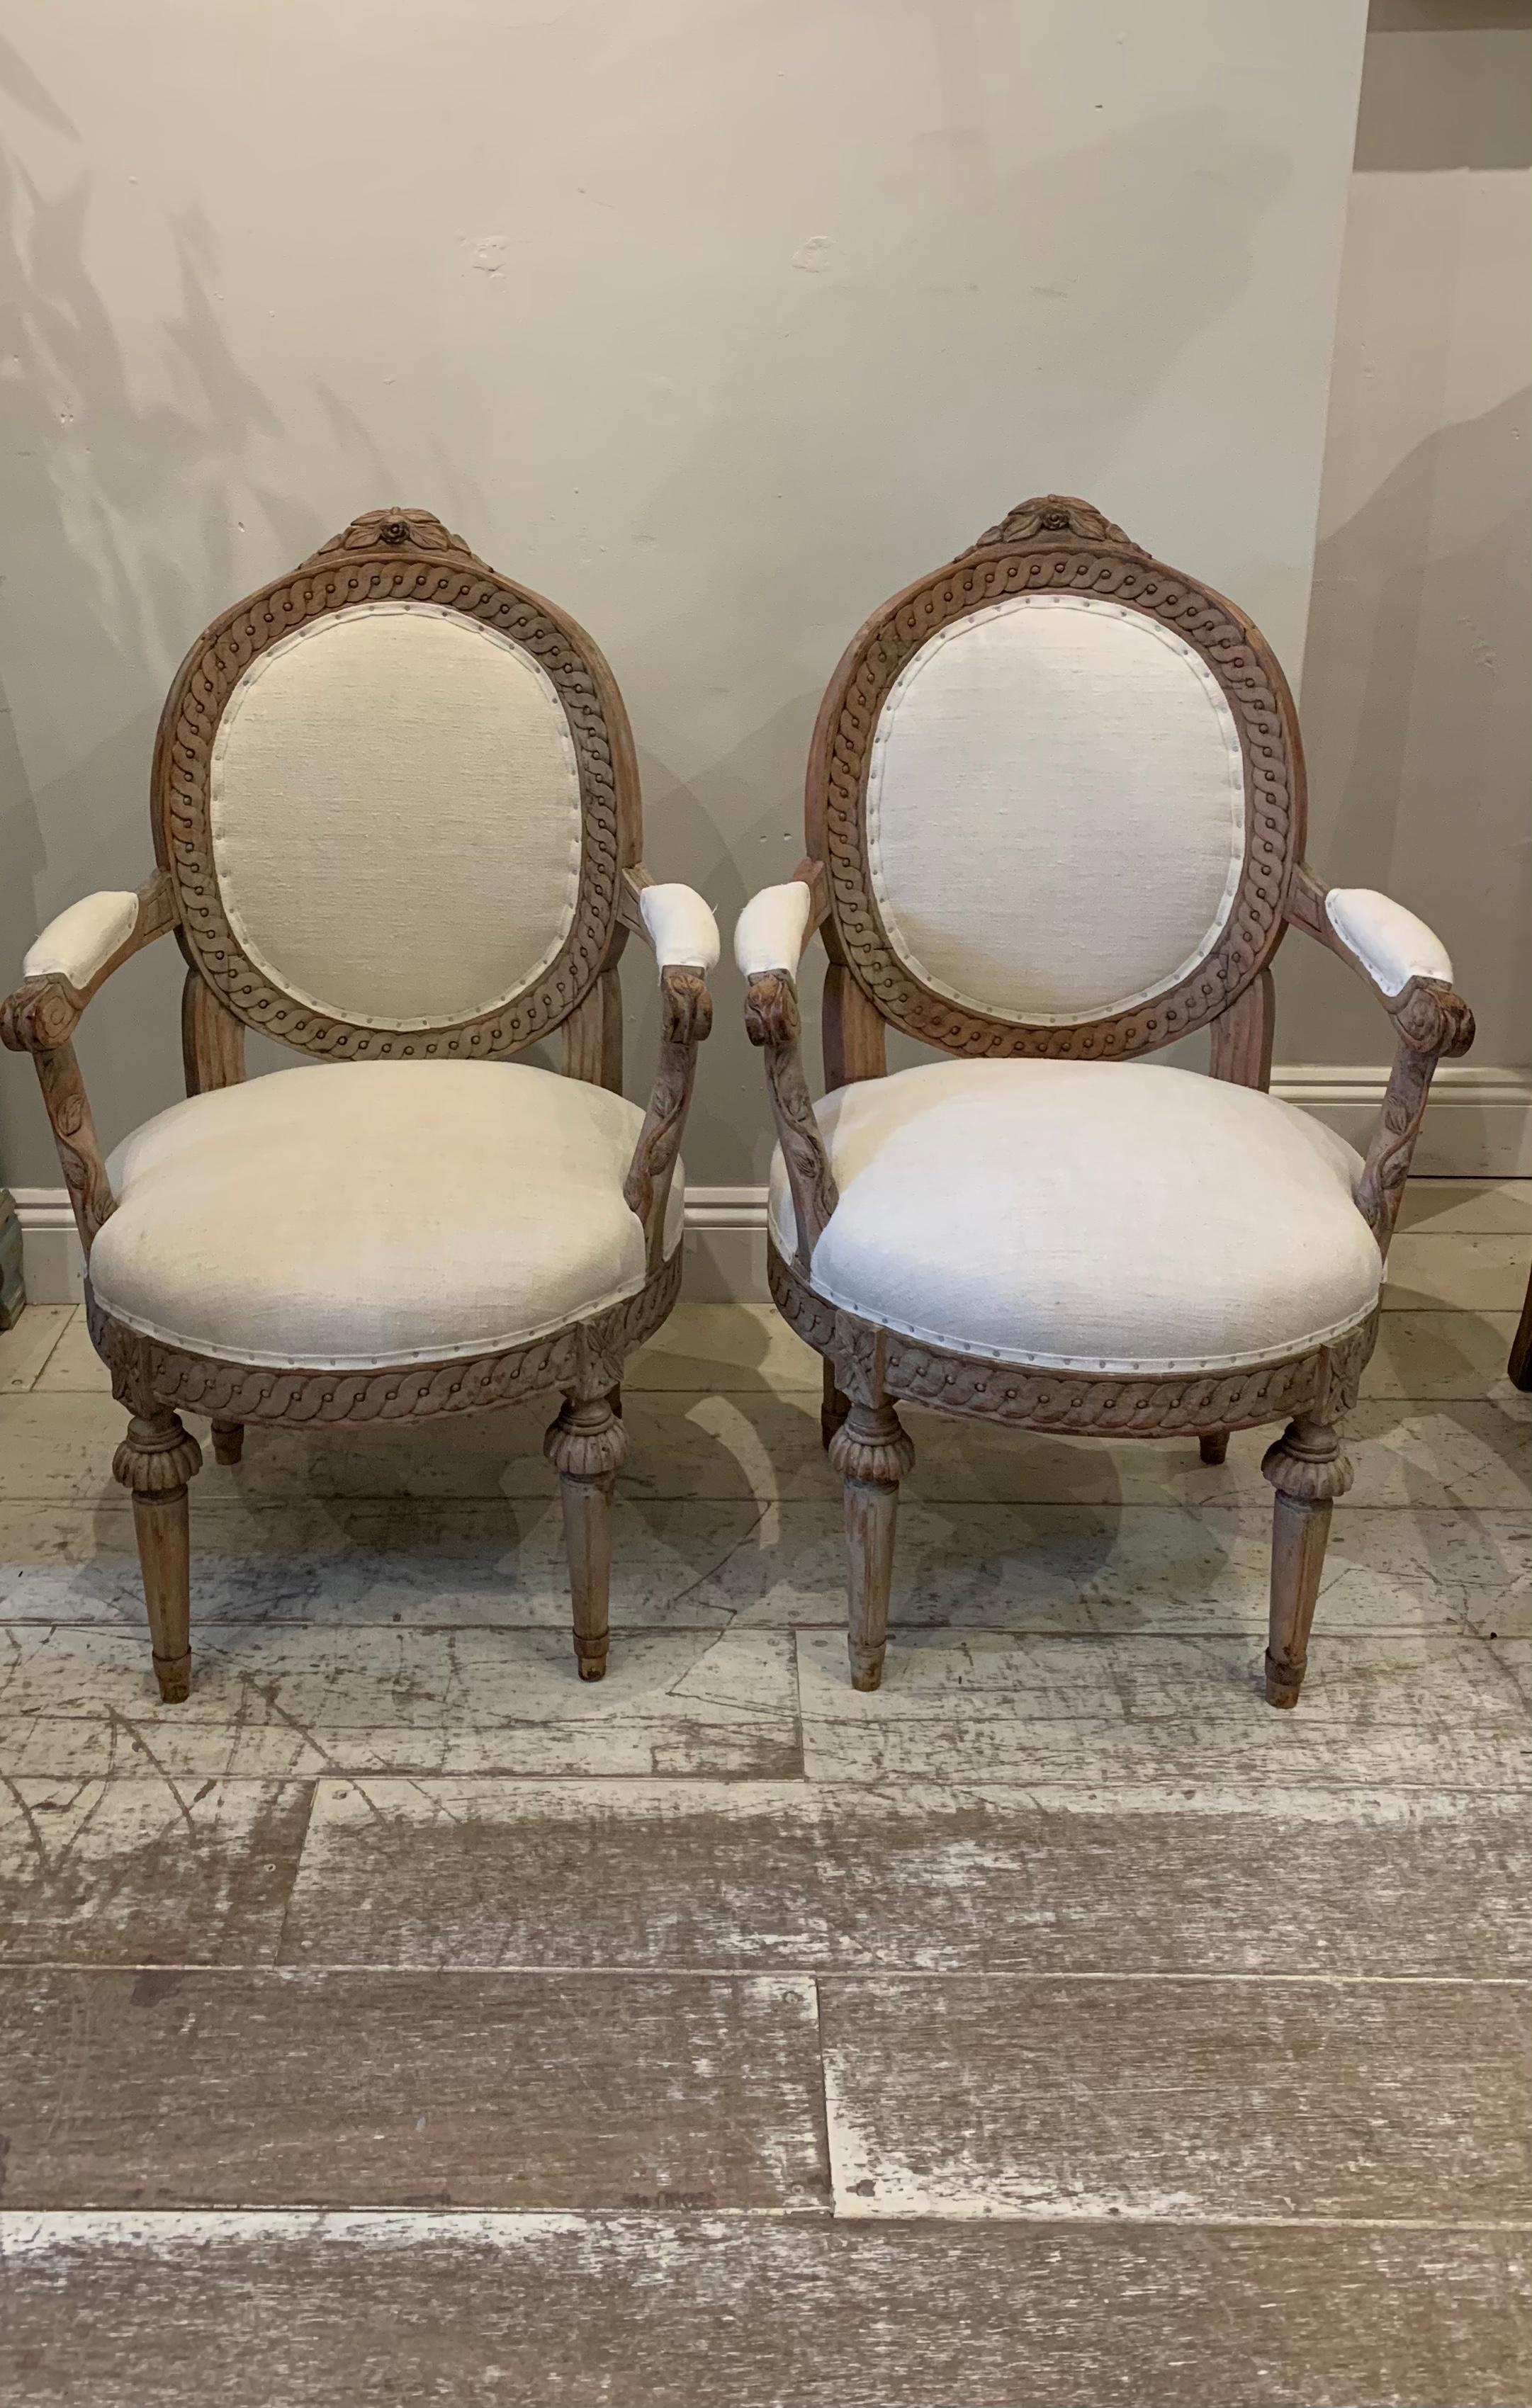 A pair of unusual Circa 19th century Swedish armchairs or side chairs.
The armchairs have been newly reupholstered in a neutral vintage French linen which complements the hand-scraped framework that still retains some slight traces of the original